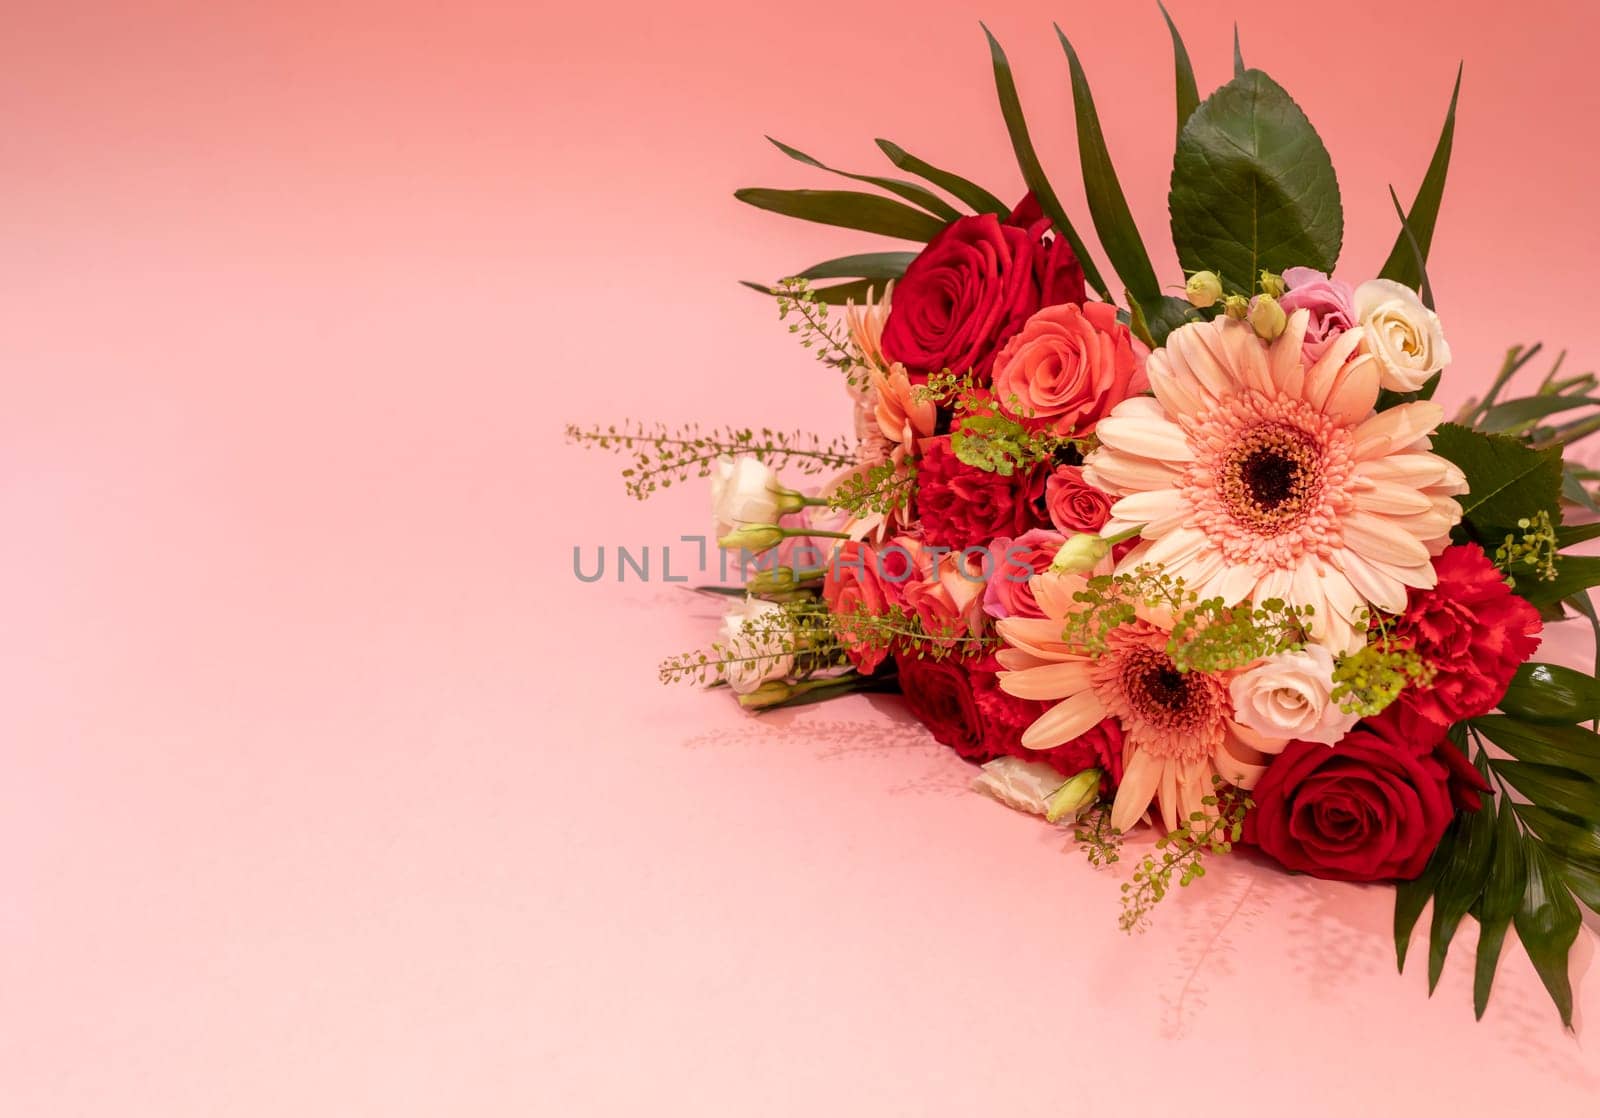 Mockup Beautiful Fresh Bouquet Of Flowers On Pinsk Background. Colorful Mixed Roses, Carnation Shabot, Green Leaves, Gerber. Horizontal Plane, Copy Space For Text.